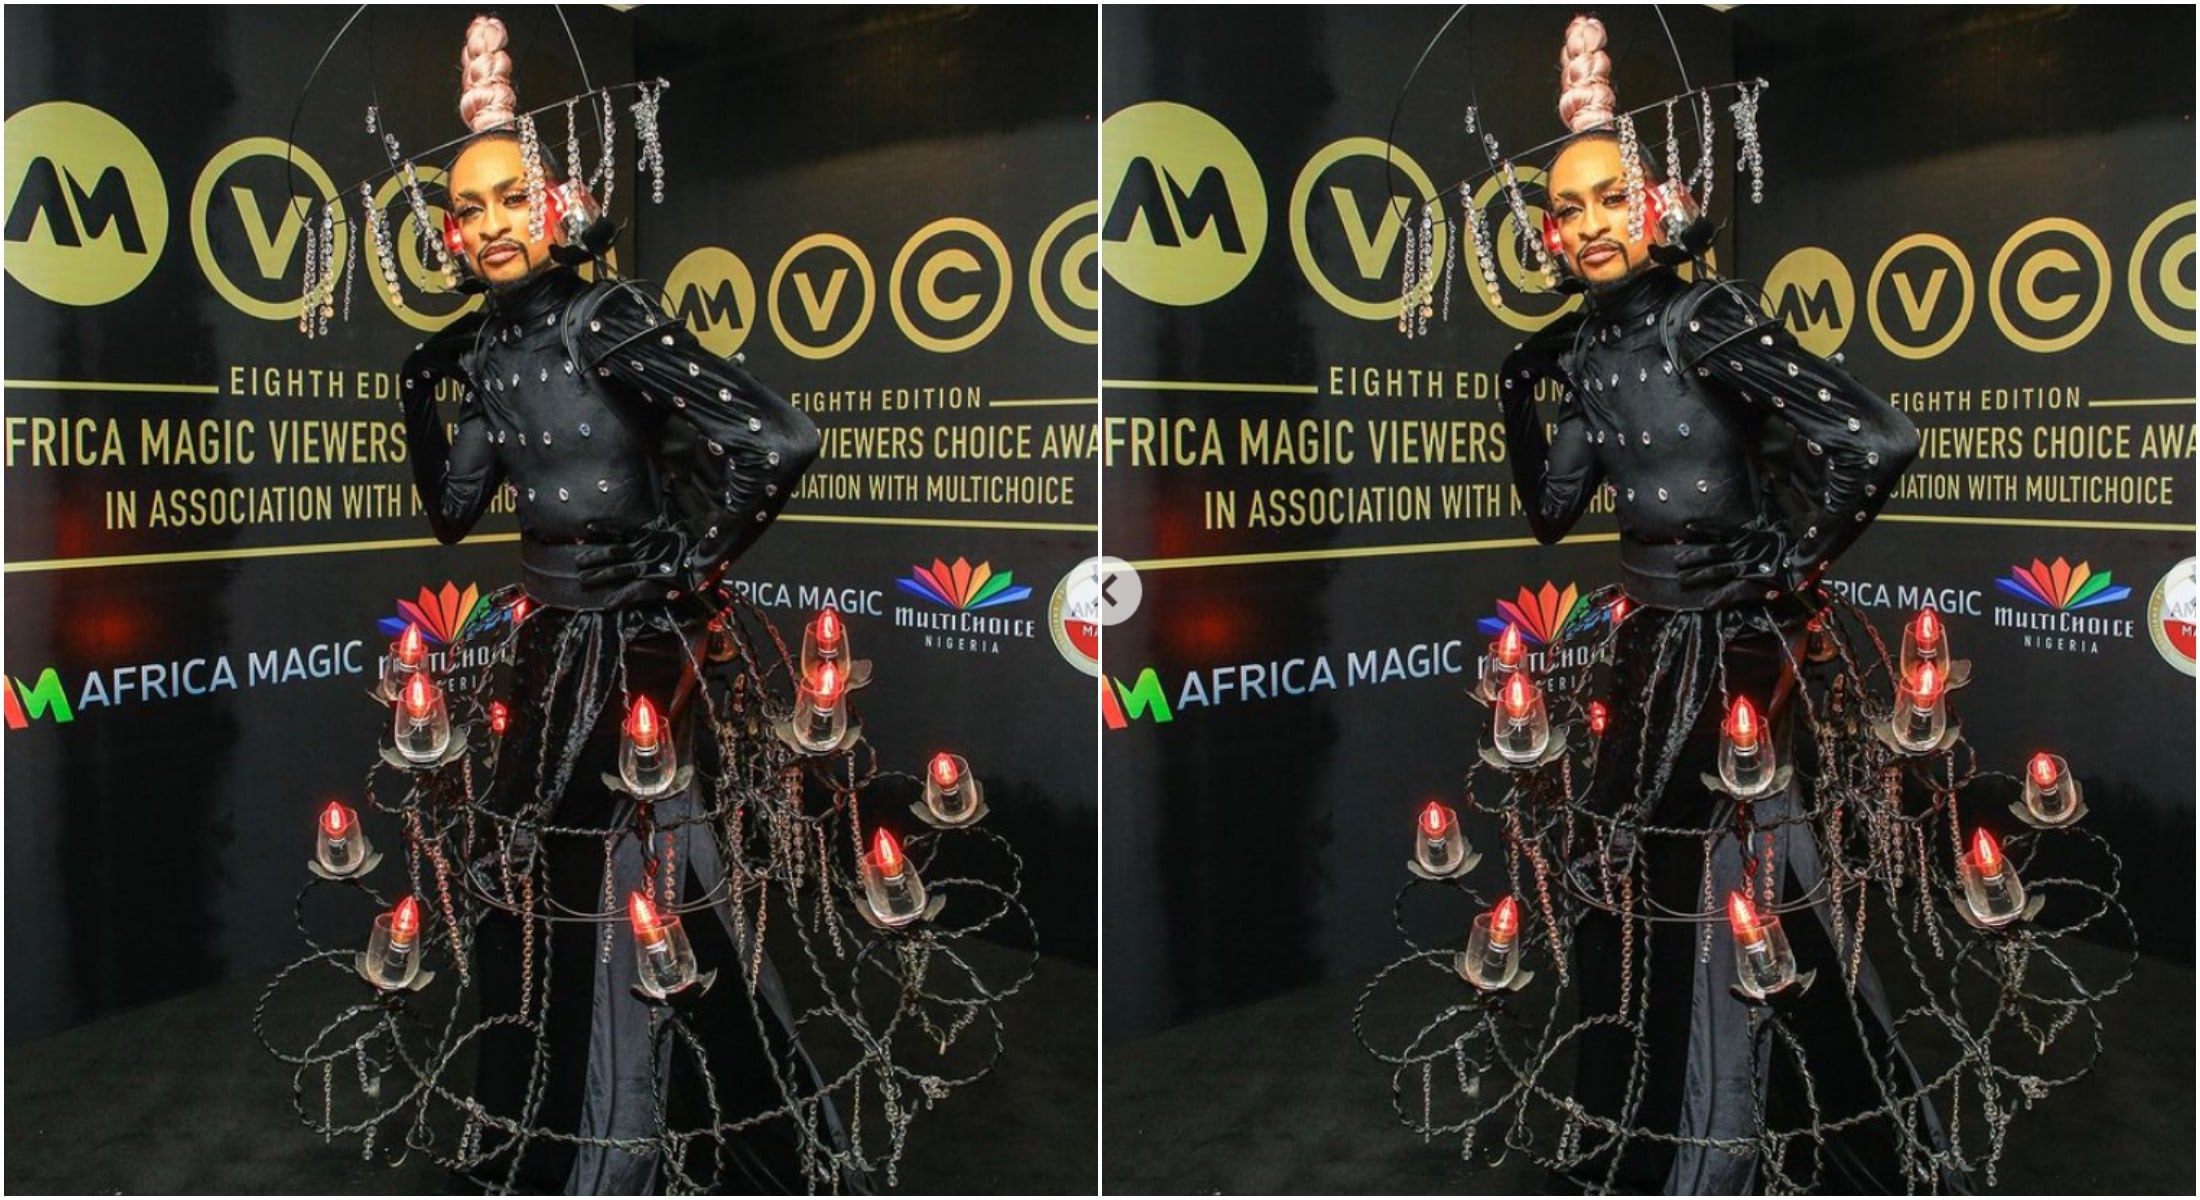 My waist still bruised from AMVCA outfit — Denrele Edun laments